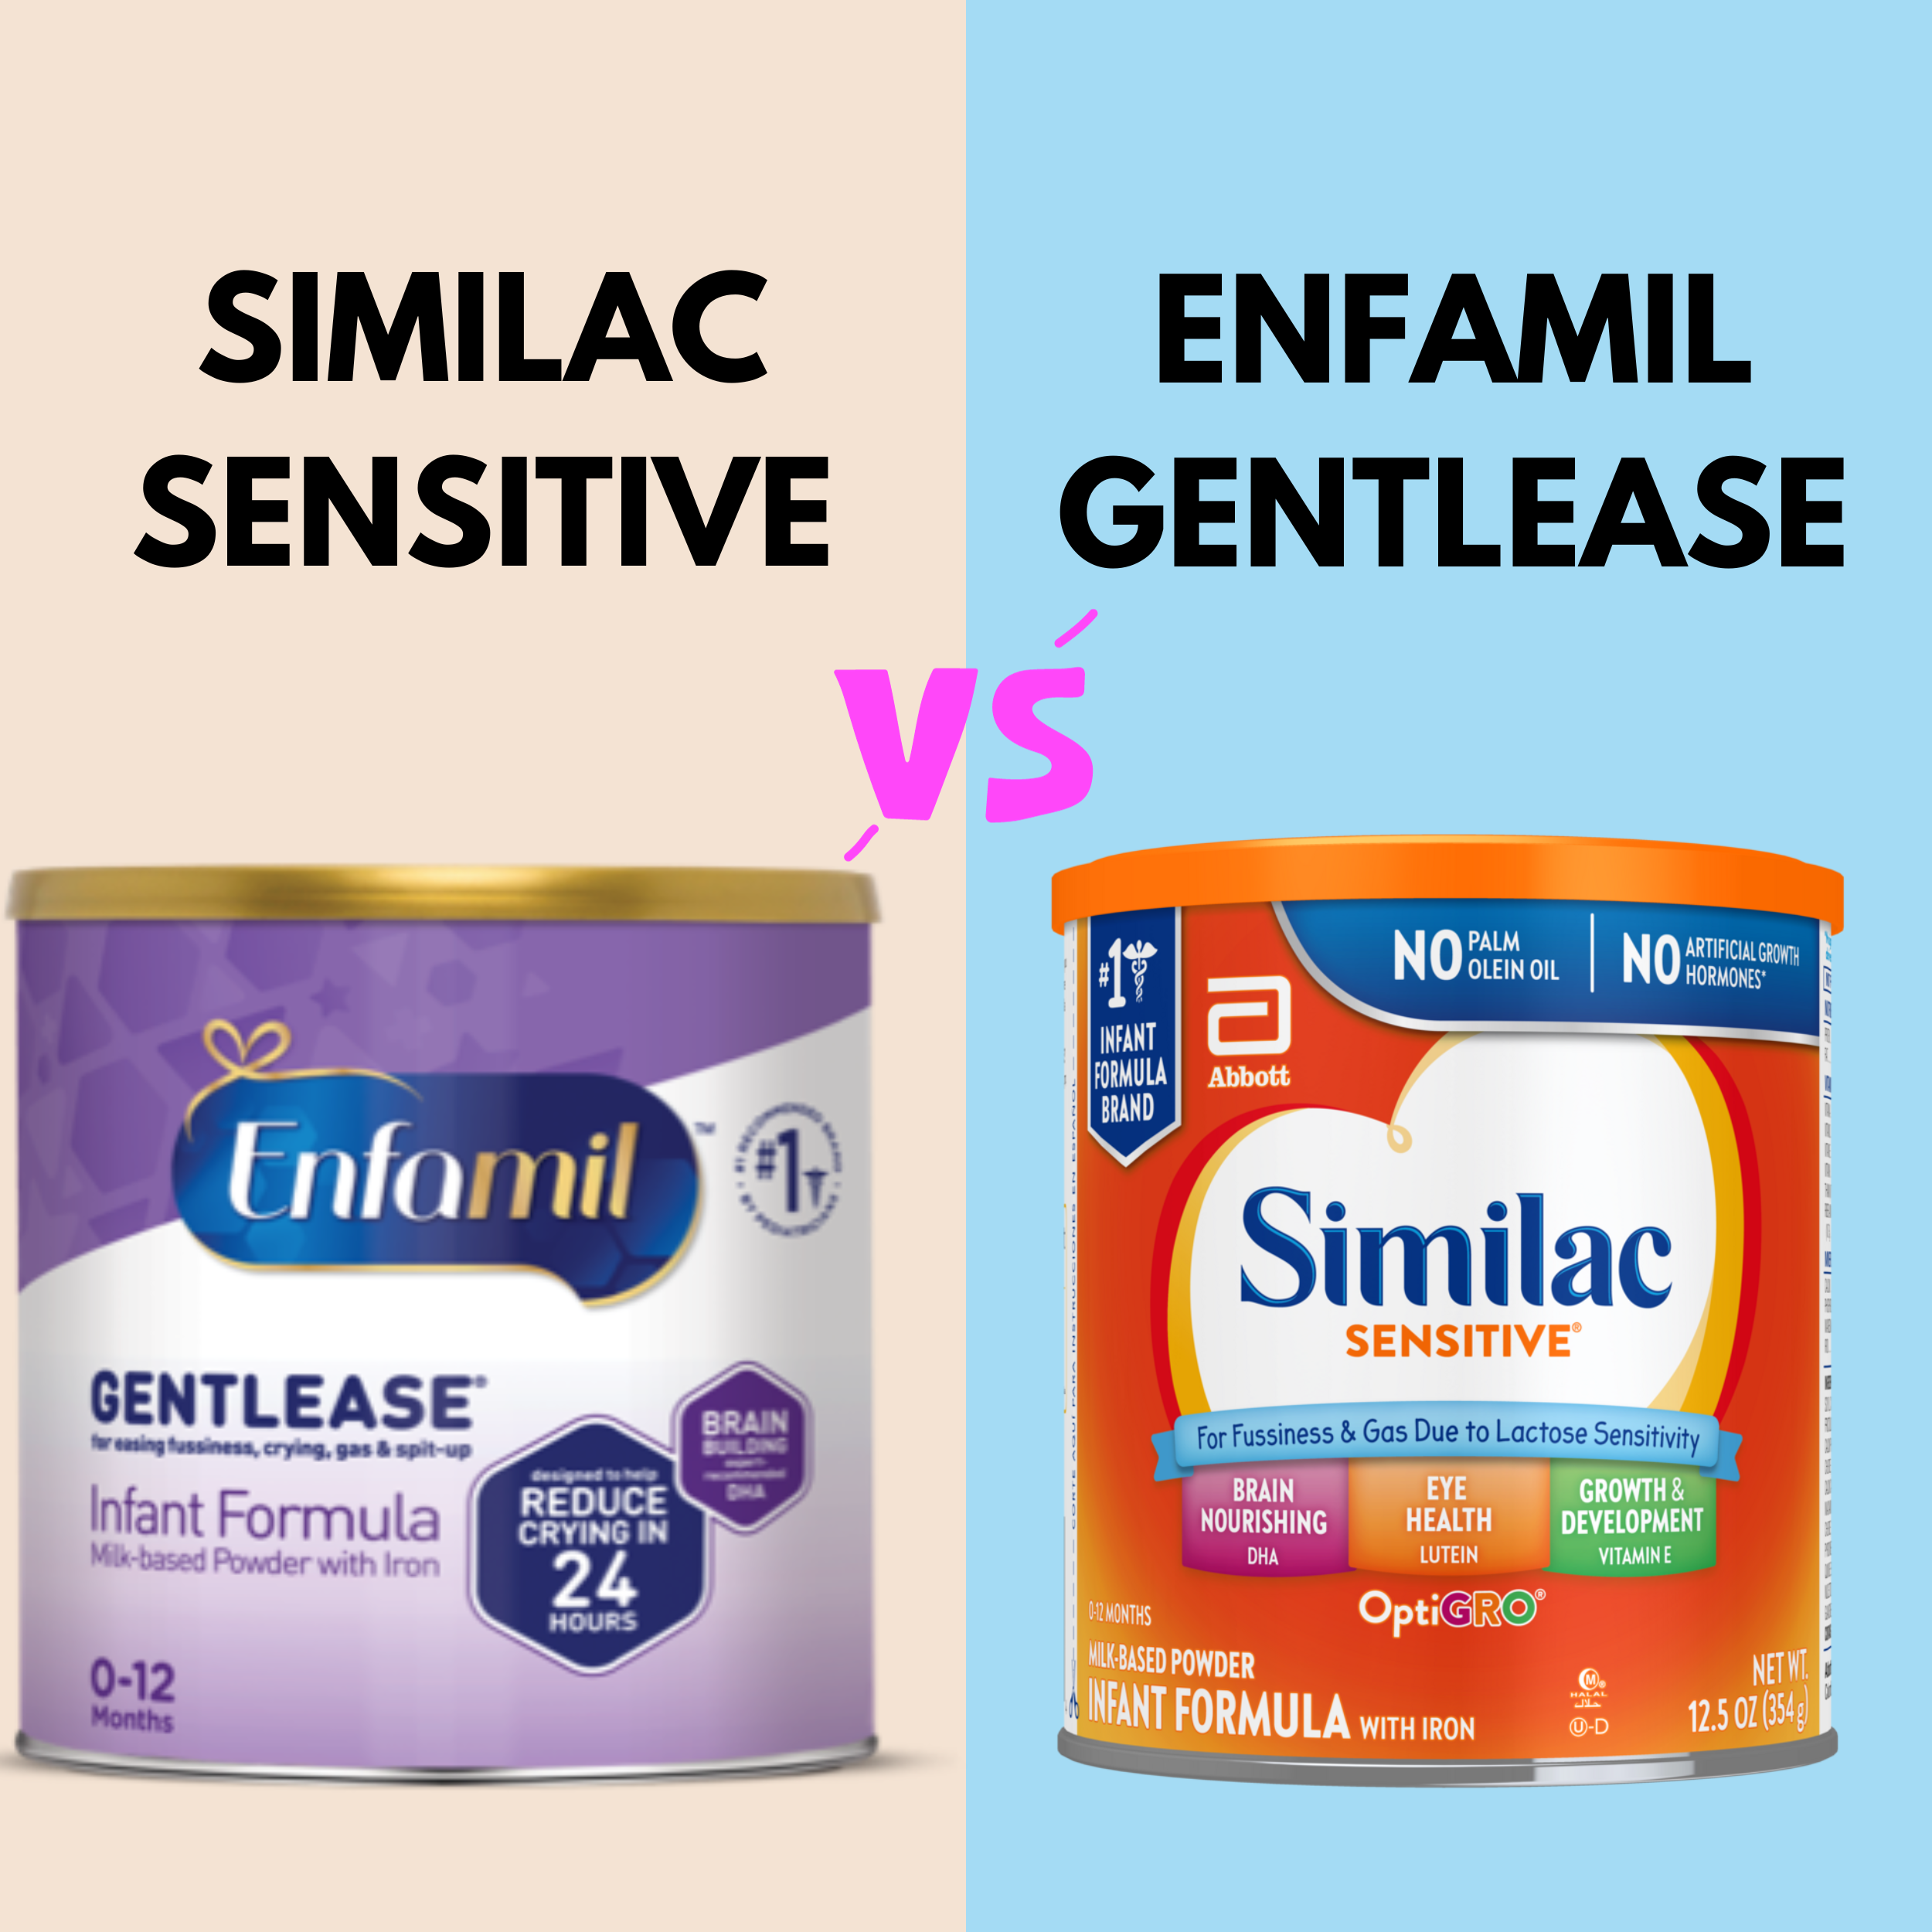 You are currently viewing Enfamil Gentlease vs. Similac Sensitive: What is the Difference?